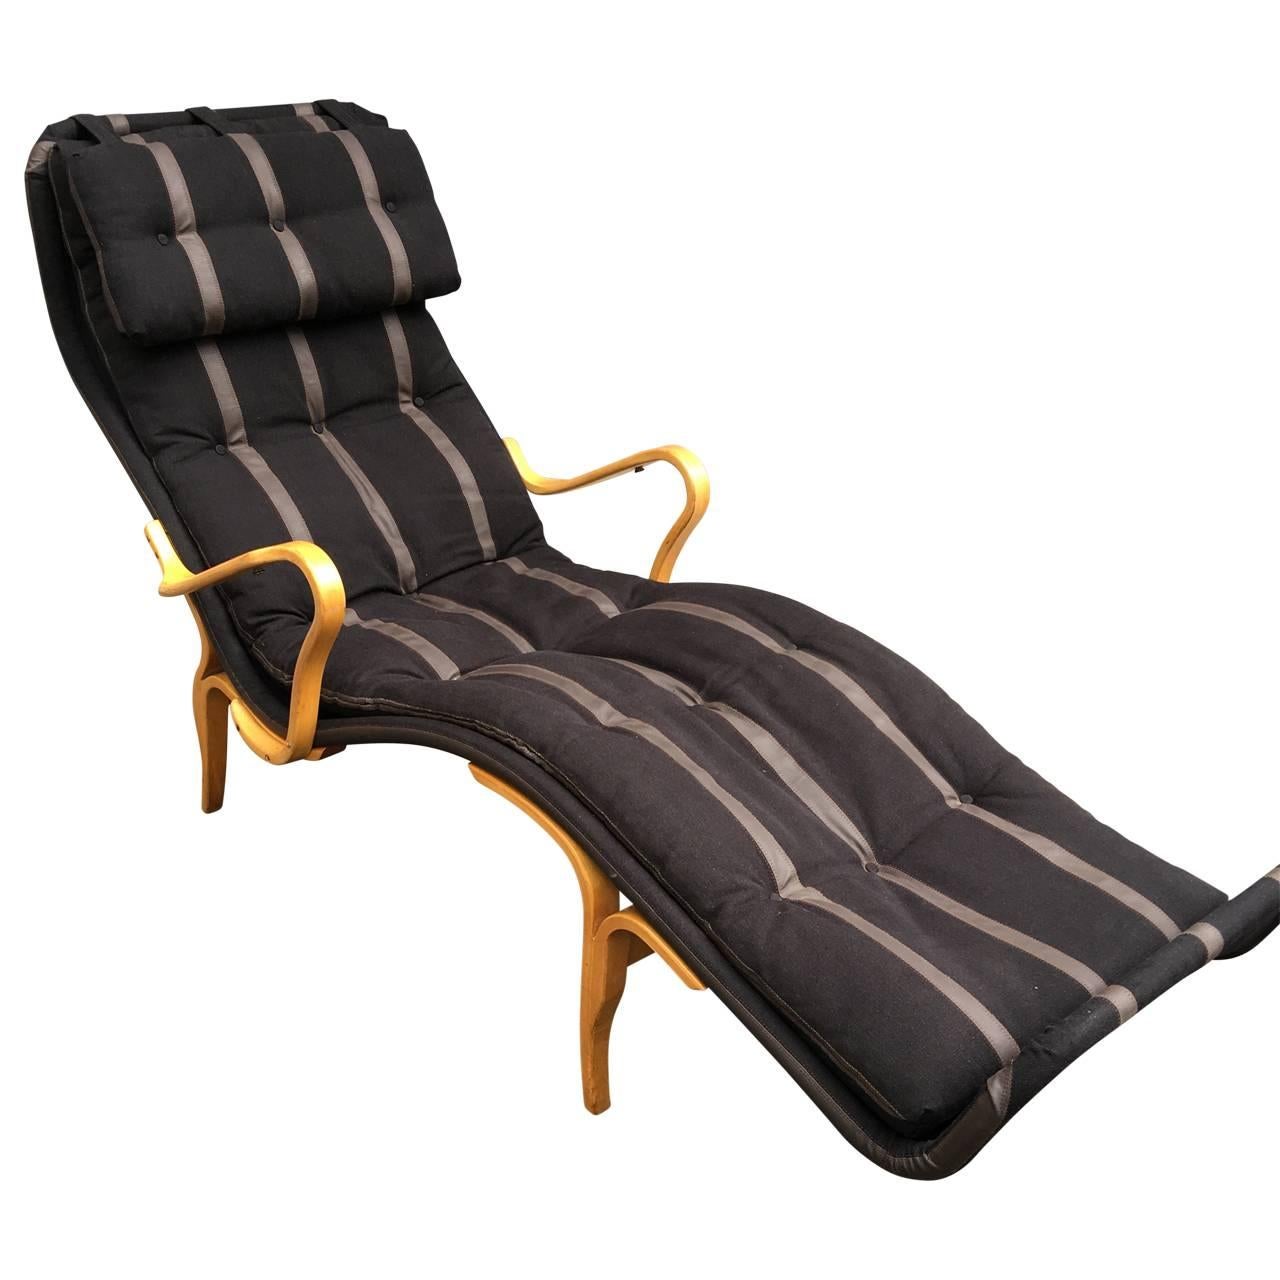 Authentic and original Bruno Mathsson longue, upholstered in black custom-made linen and leather with head pillow.
Signed Bruno Mathsson by DUX.